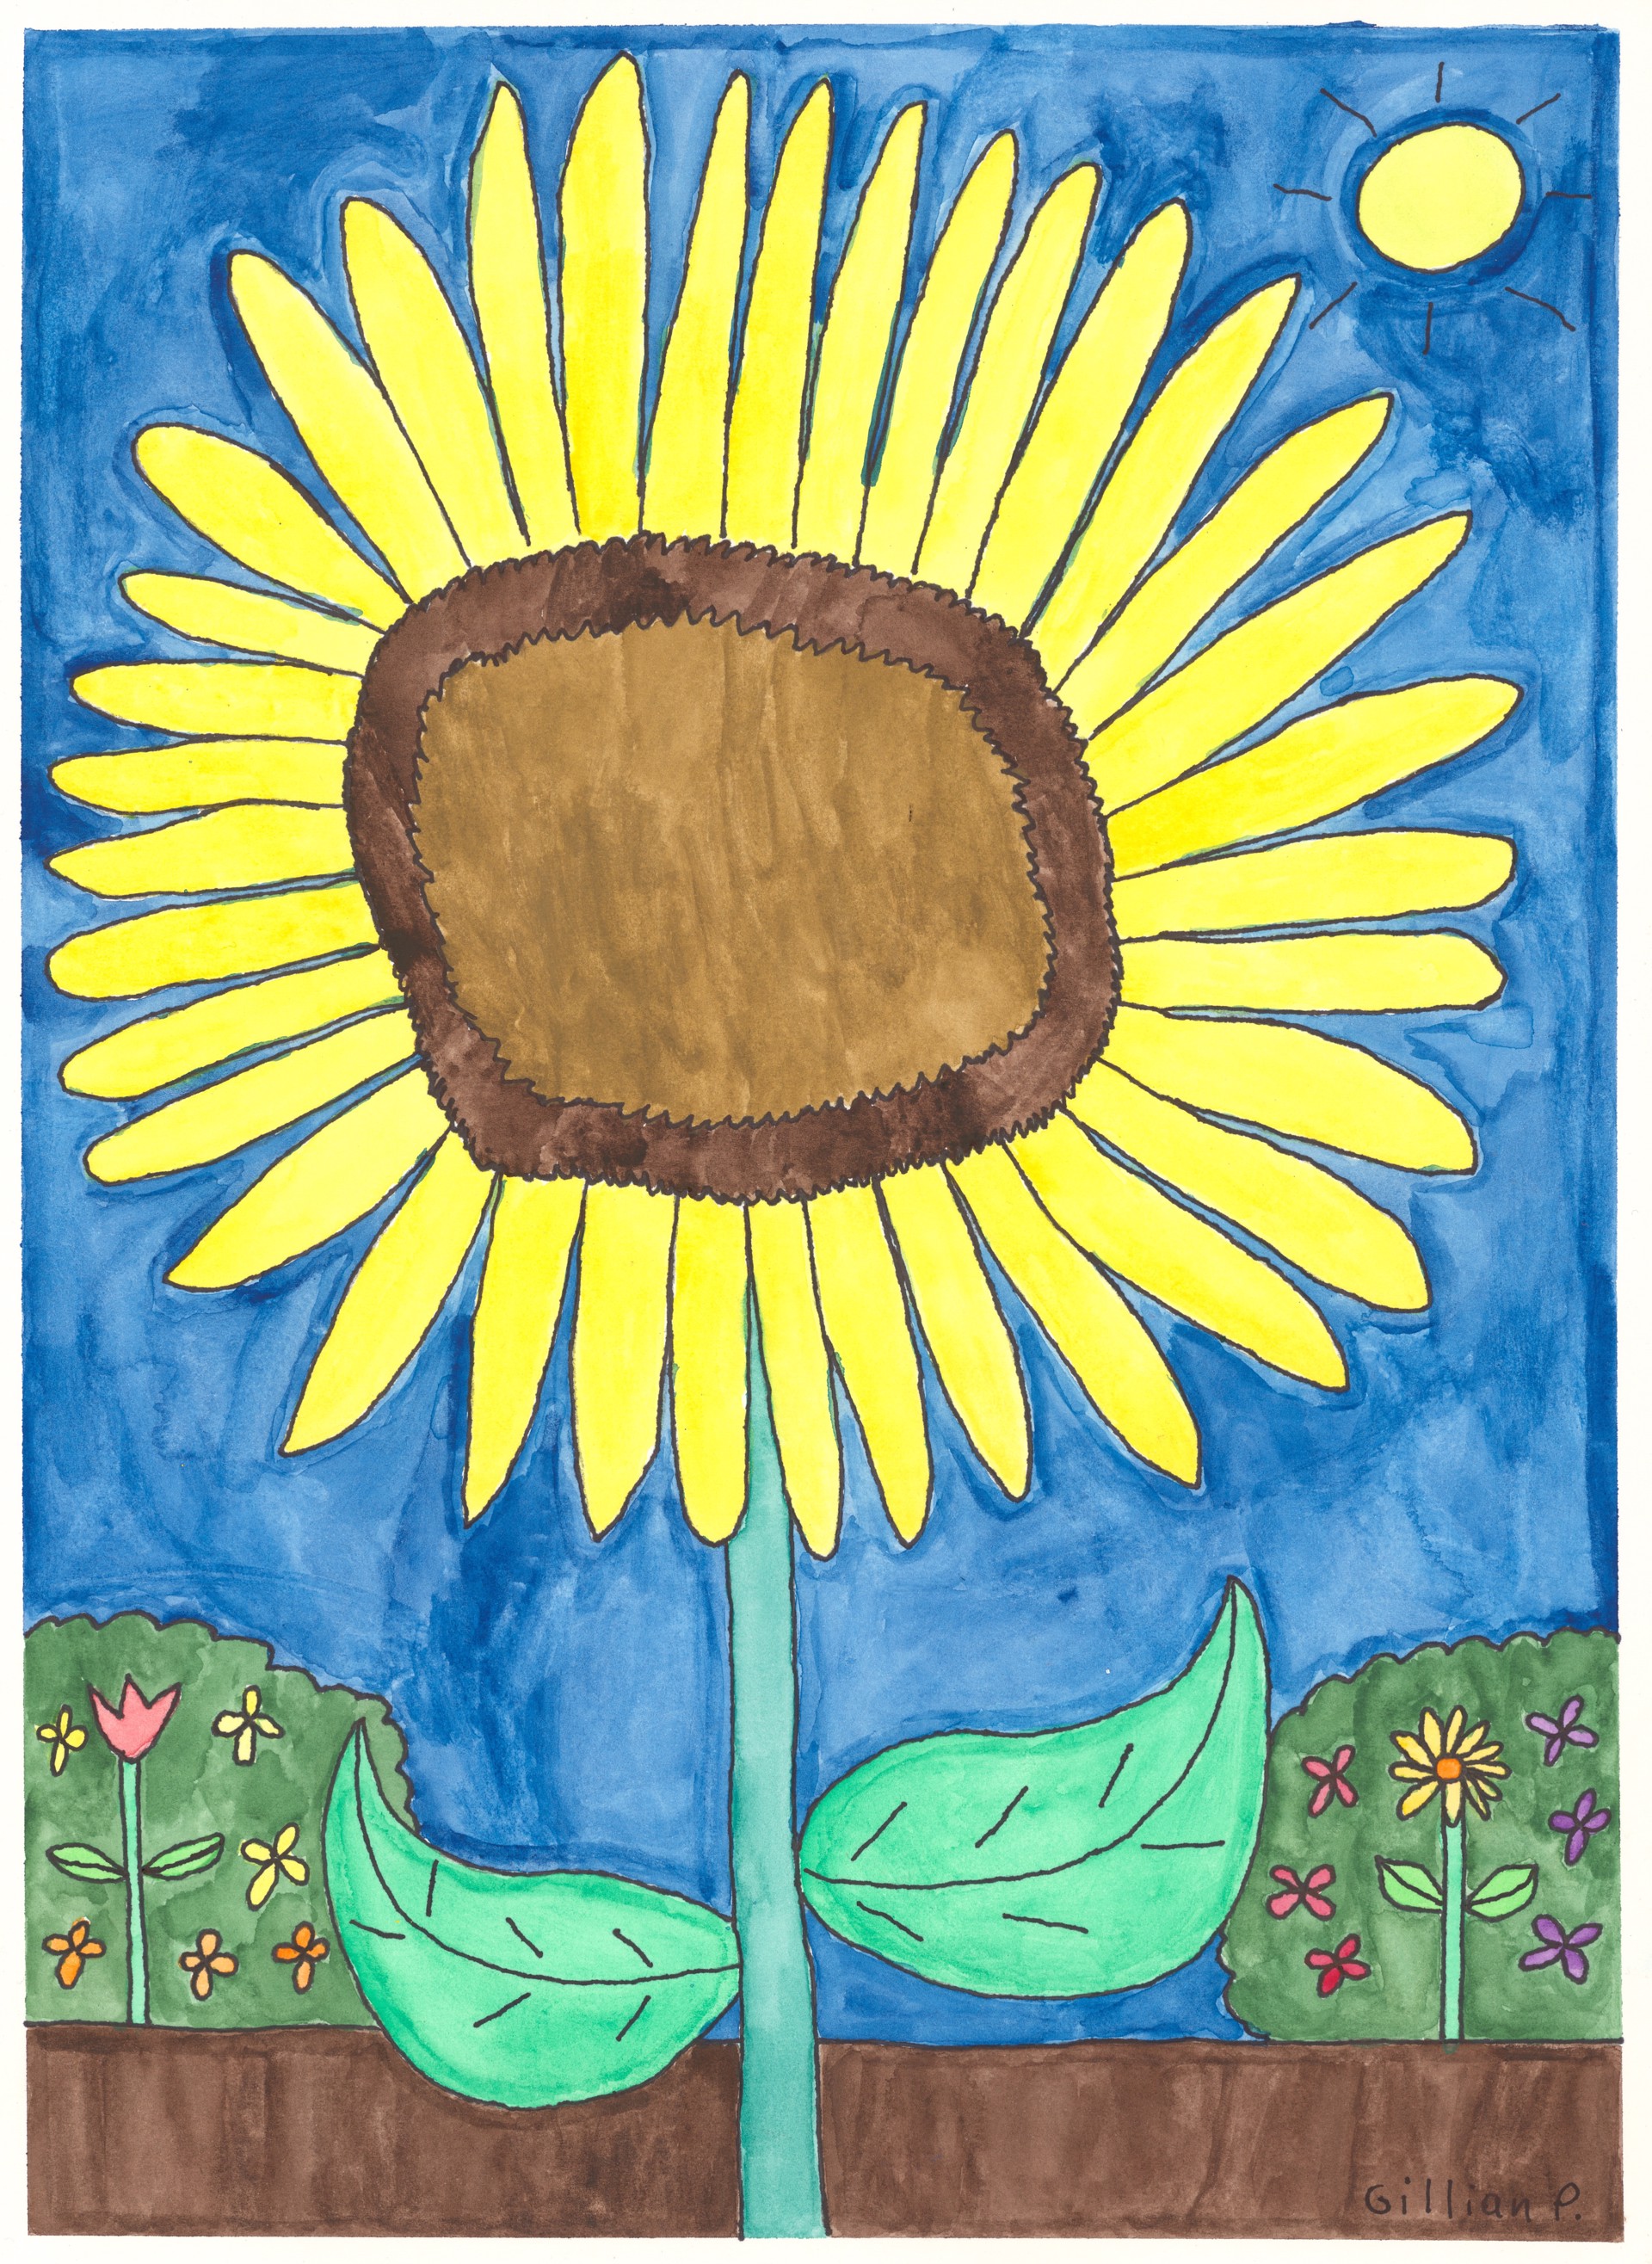 The Happy Sunflower by Gillian Patterson